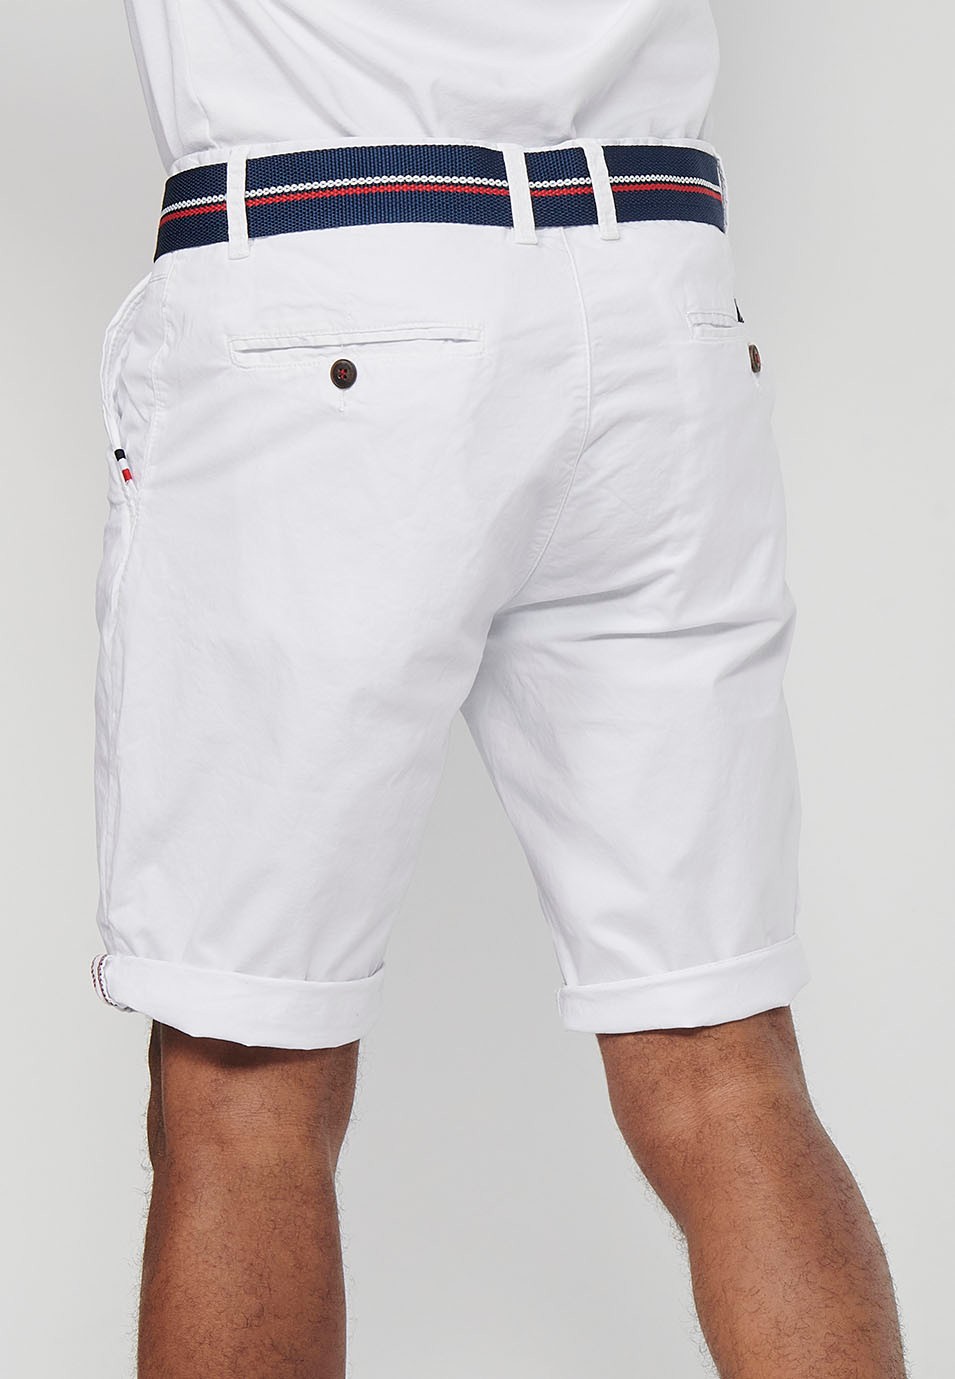 Shorts with a turn-up finish with front closure with zipper and button and belt in White for Men 8